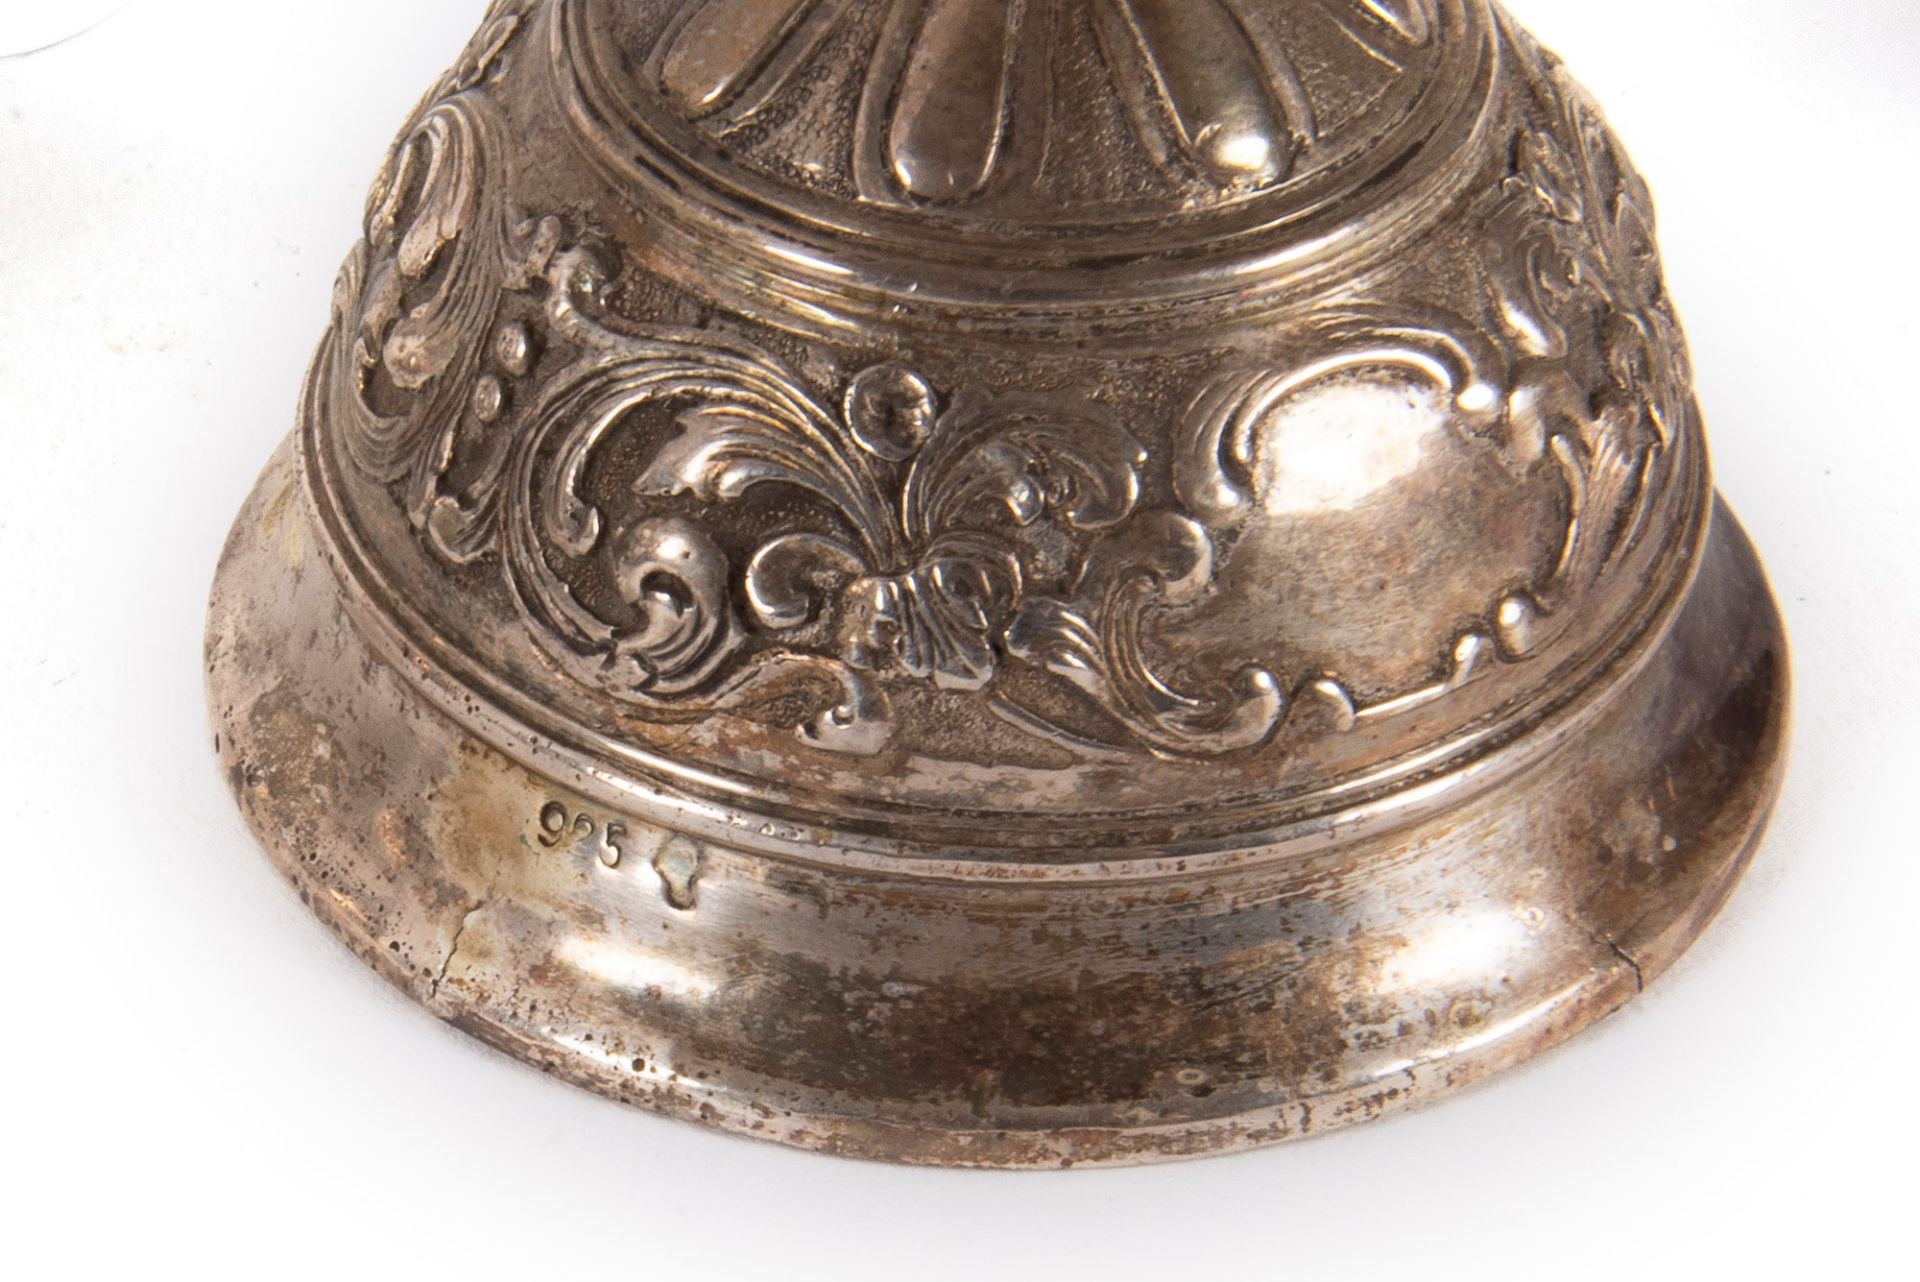 Lot consisting of seven bells in sterling silver, late 19th century - early 20th century - Image 2 of 4